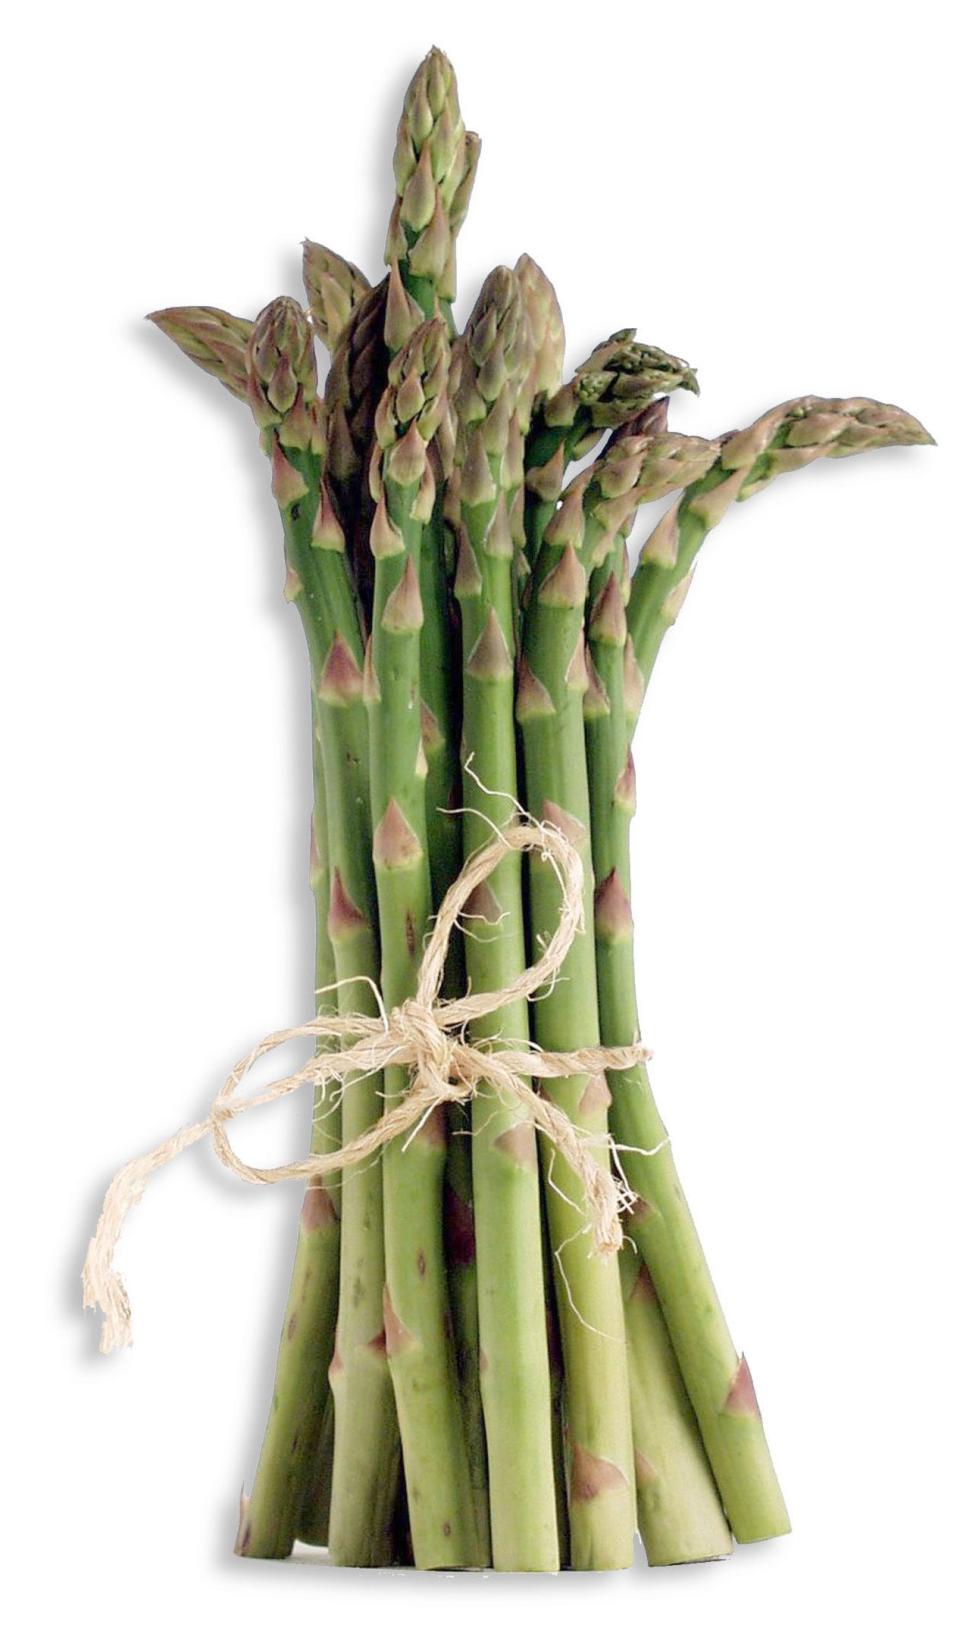 Asparagus is the star at the West Brookfield Asparagus and Flower Heritage Festival